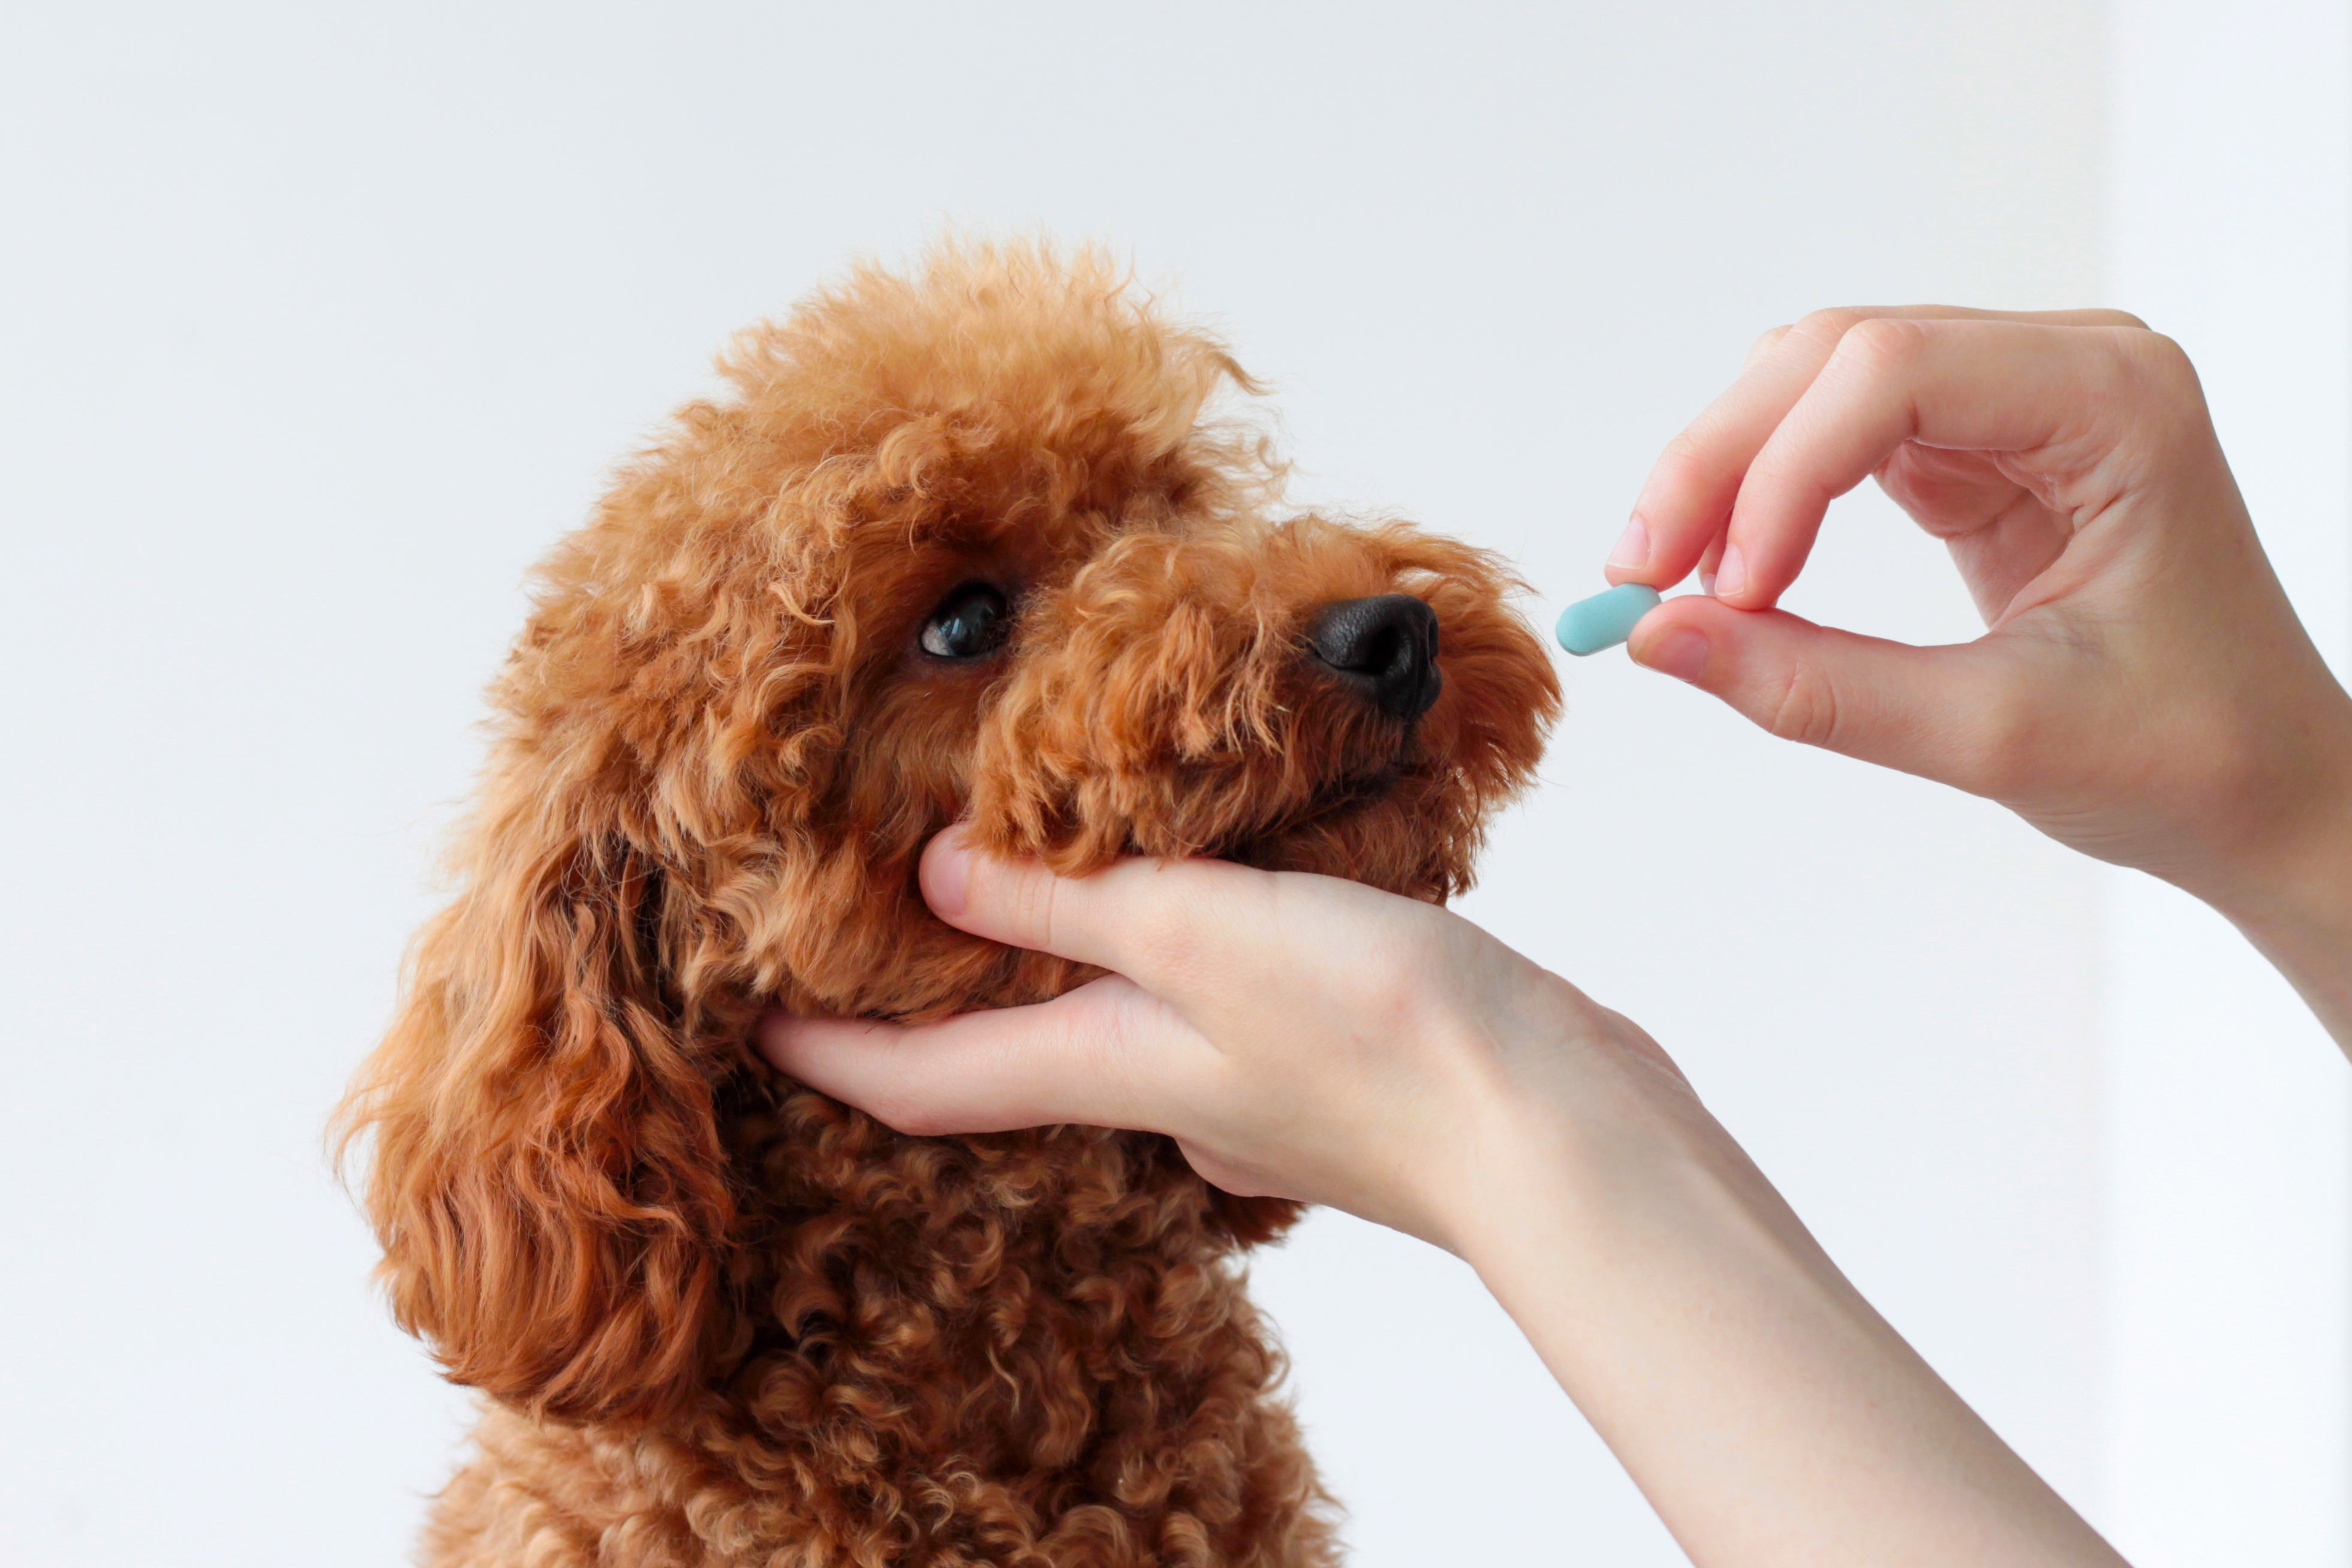 A human hand with a pill in front of a dog's mouth